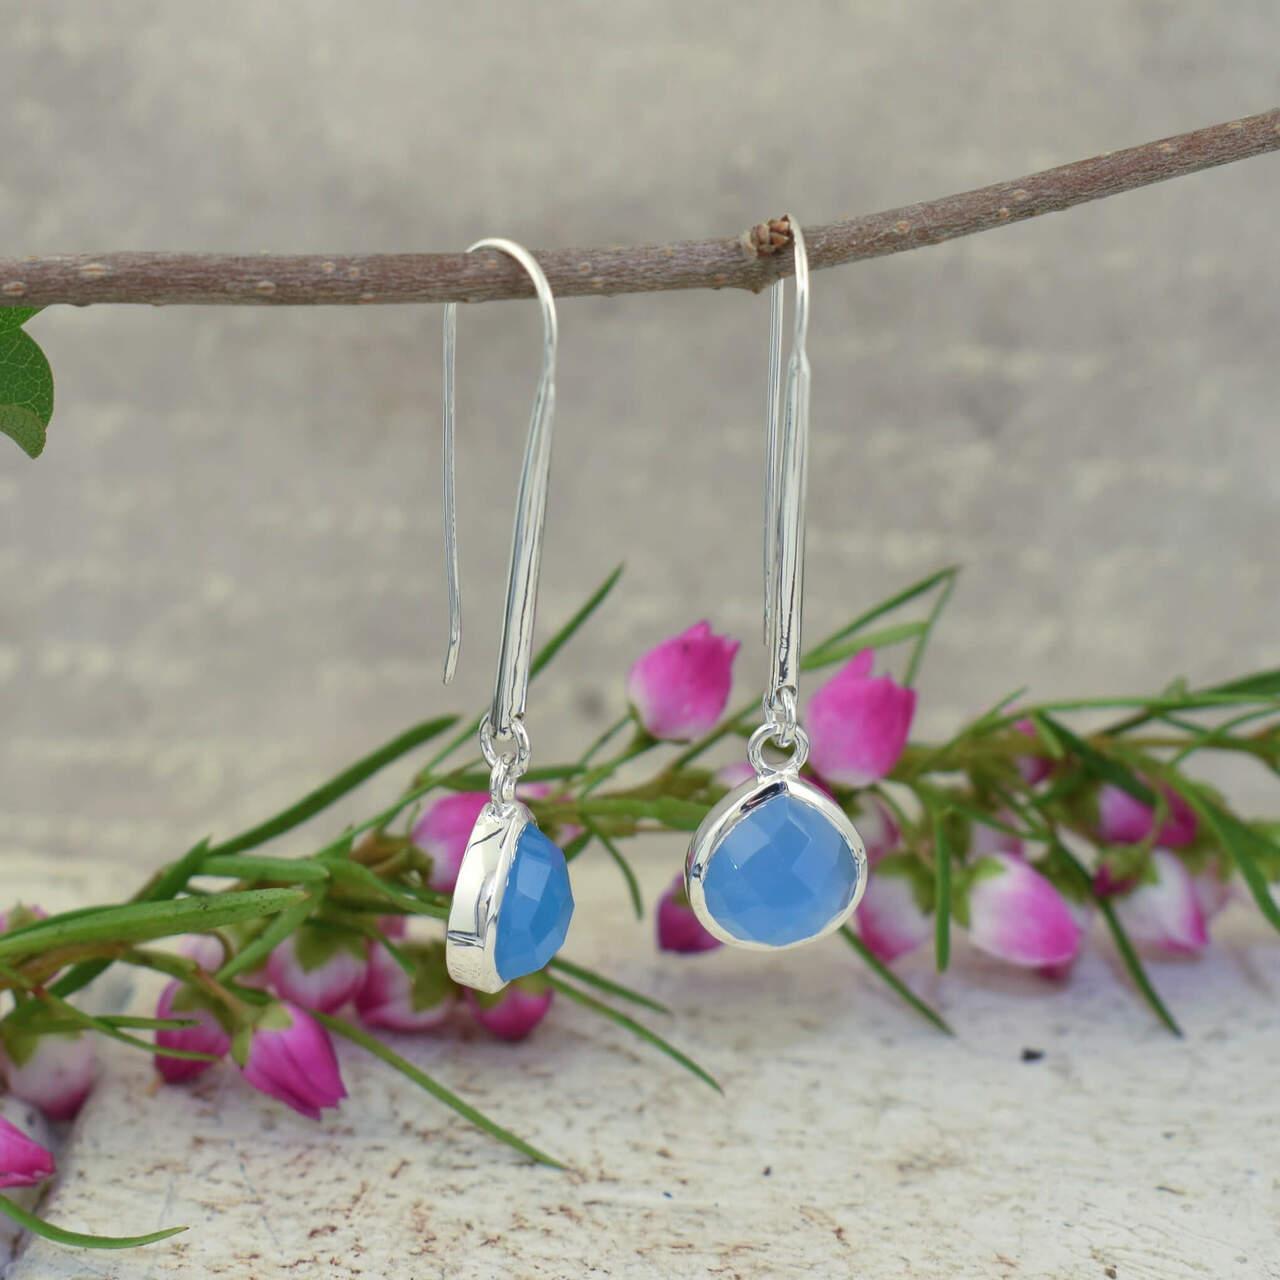 Blue stone earrings with .925 sterling silver